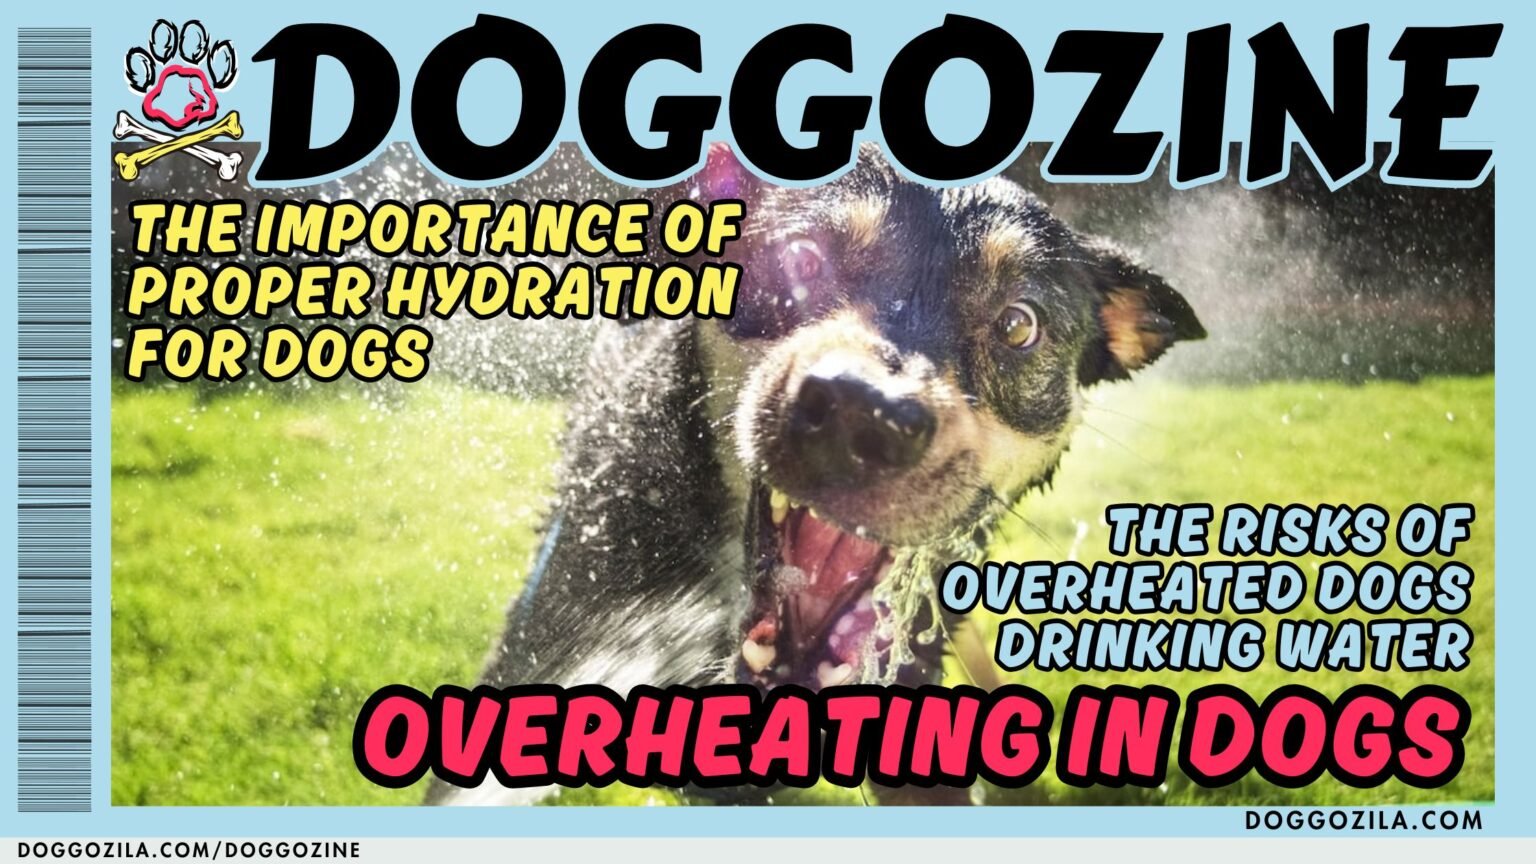 OVERHEATING IN DOGS